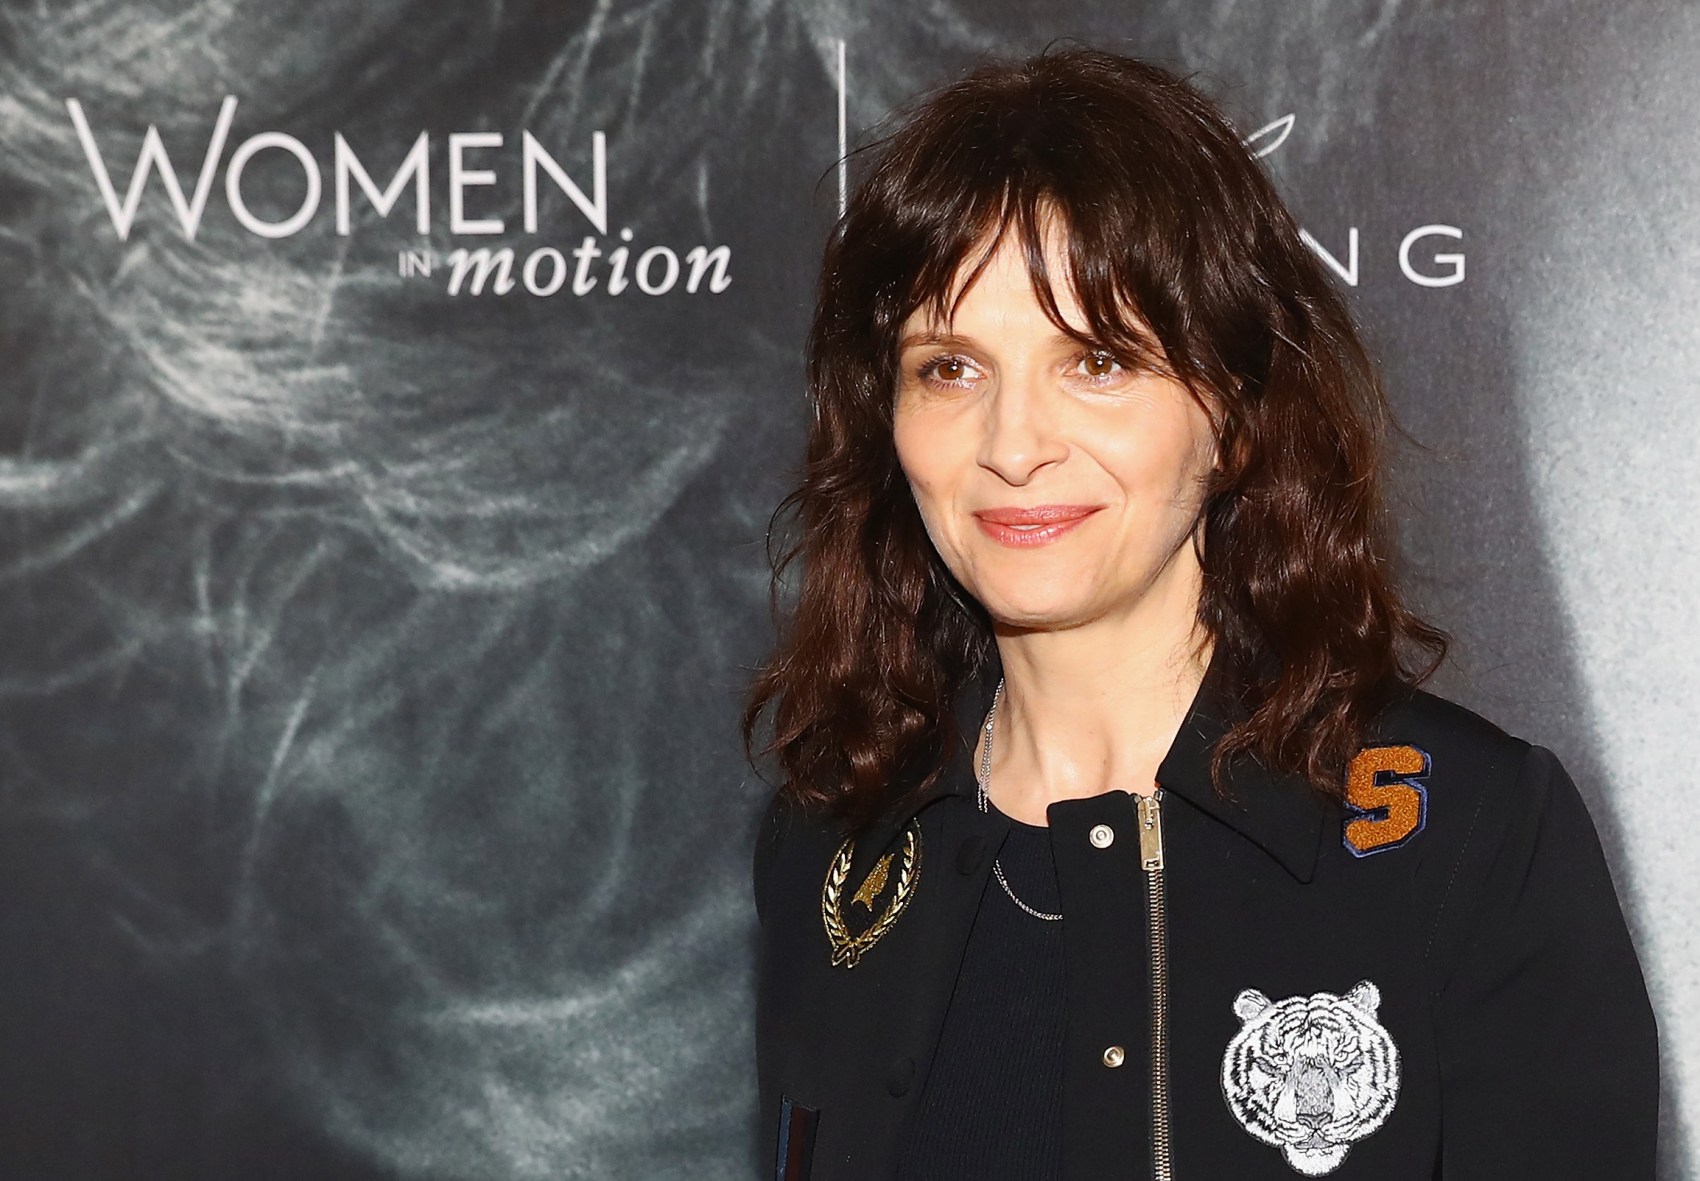 Kering Talks Women In Motion At The 69th Cannes Film Festival